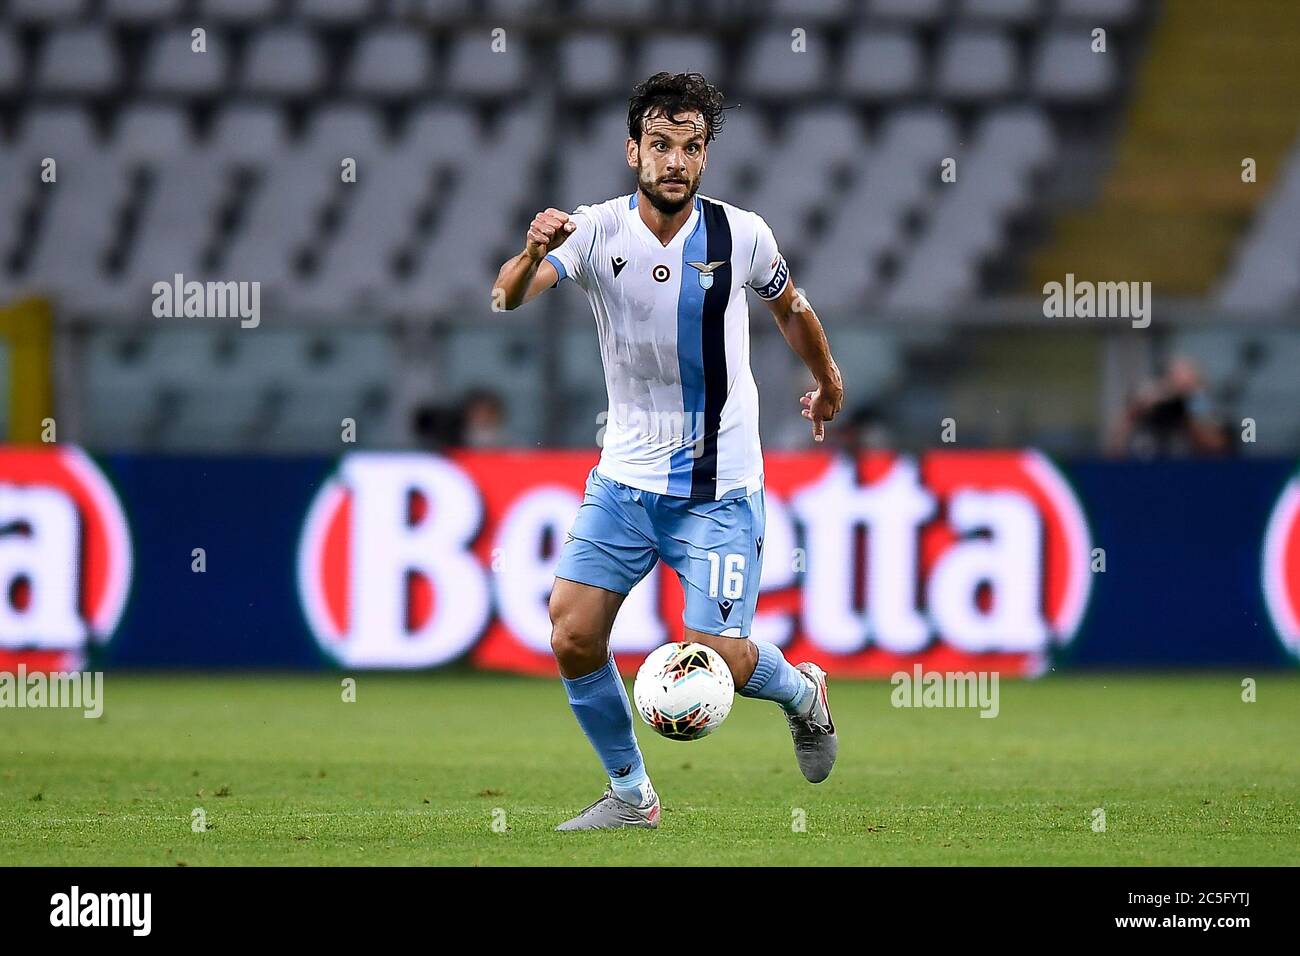 Turin, Italy. 30th June, 2020. TURIN, ITALY - June 30, 2020: Marco Parolo of SS Lazio in action during the Serie A football match between Torino FC and SS Lazio. (Photo by Nicolò Campo/Sipa USA) Credit: Sipa USA/Alamy Live News Stock Photo